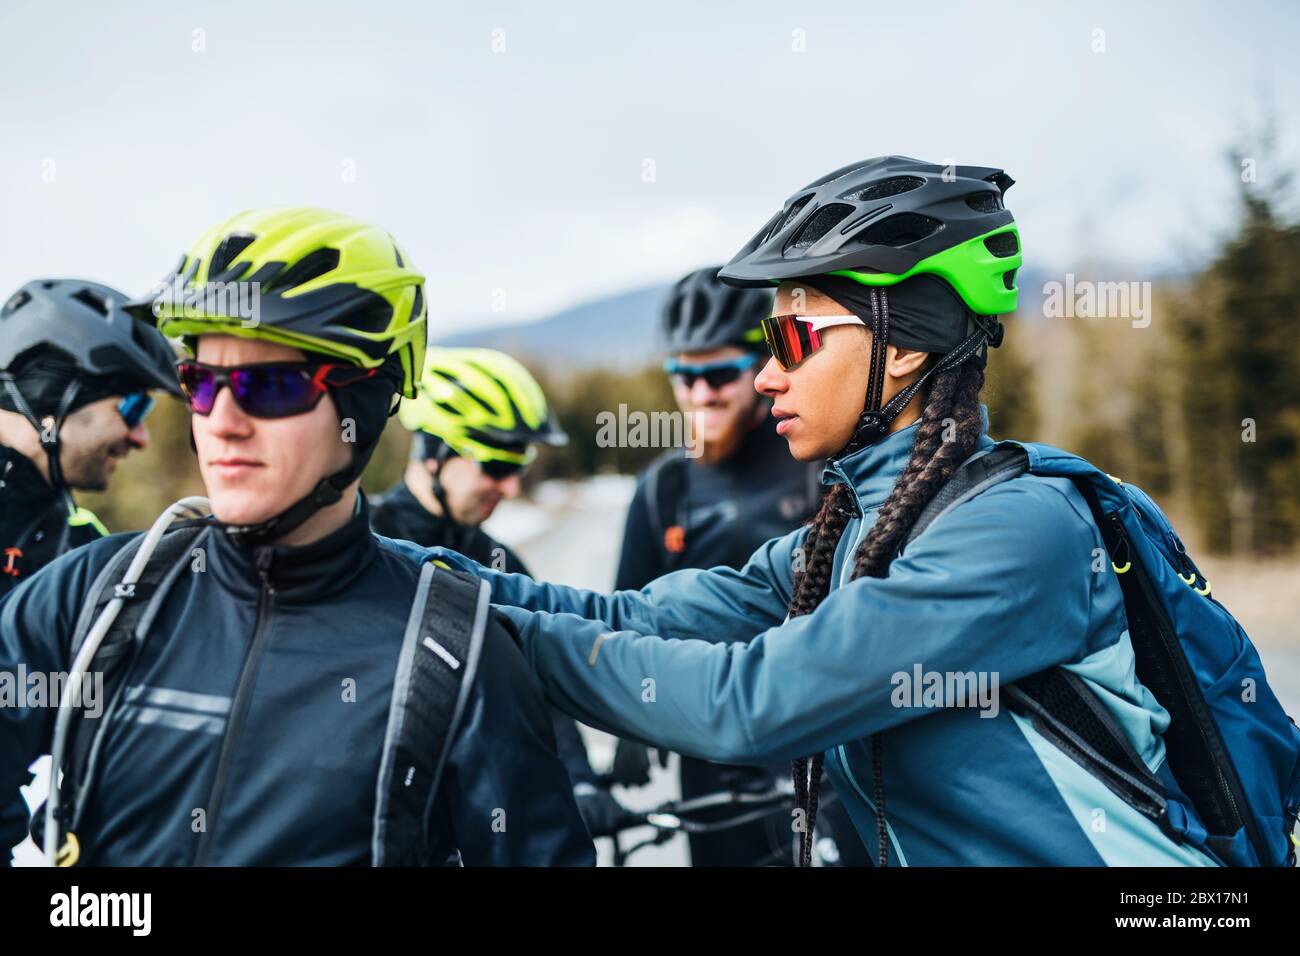 Group of mountain bikers standing on road outdoors in winter, talking. Stock Photo